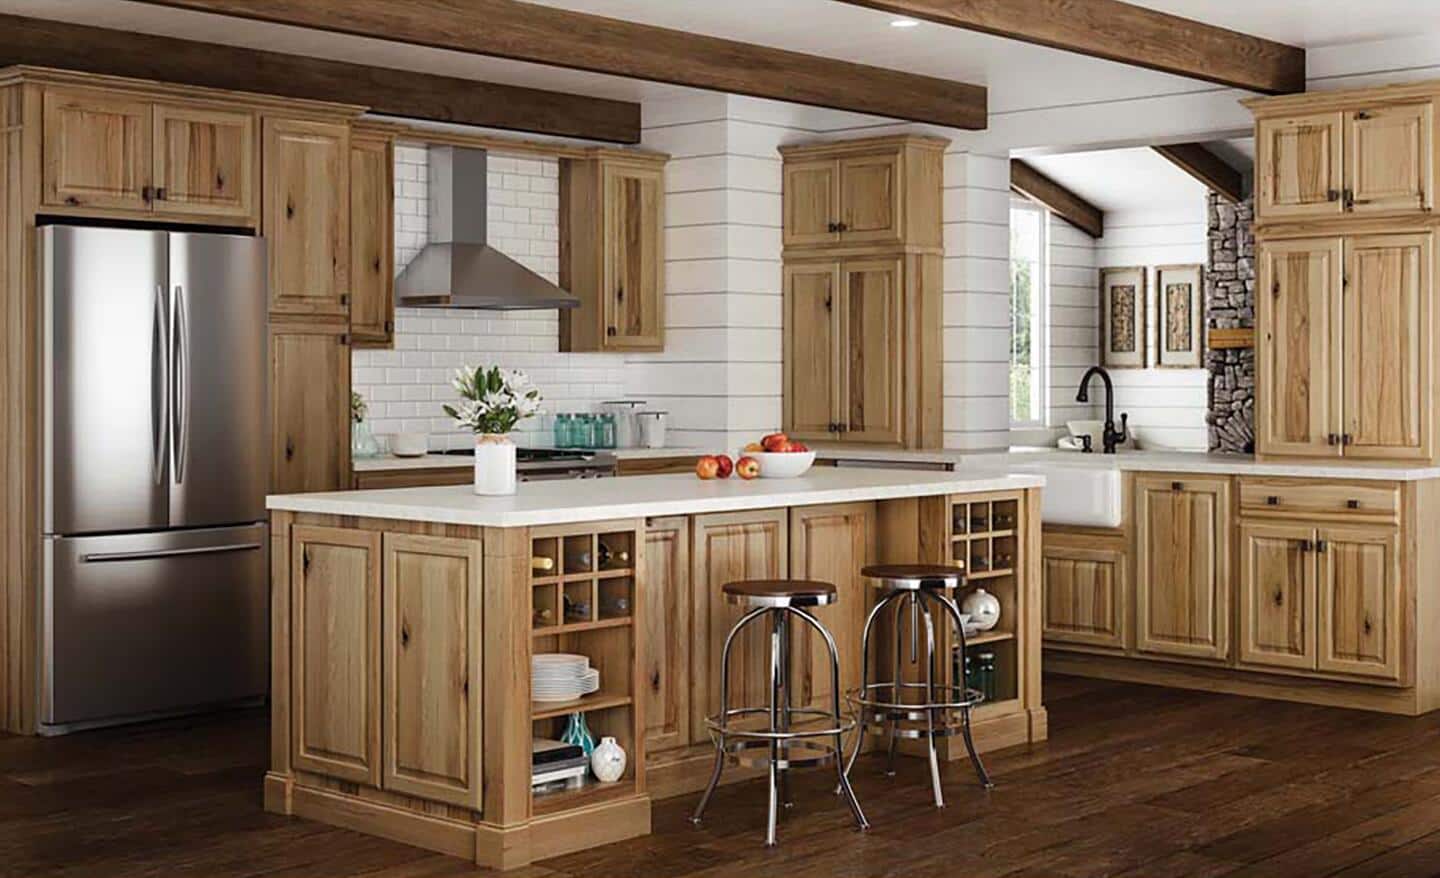 A kitchen with wood cabinetry featuring a natural hickory tone.